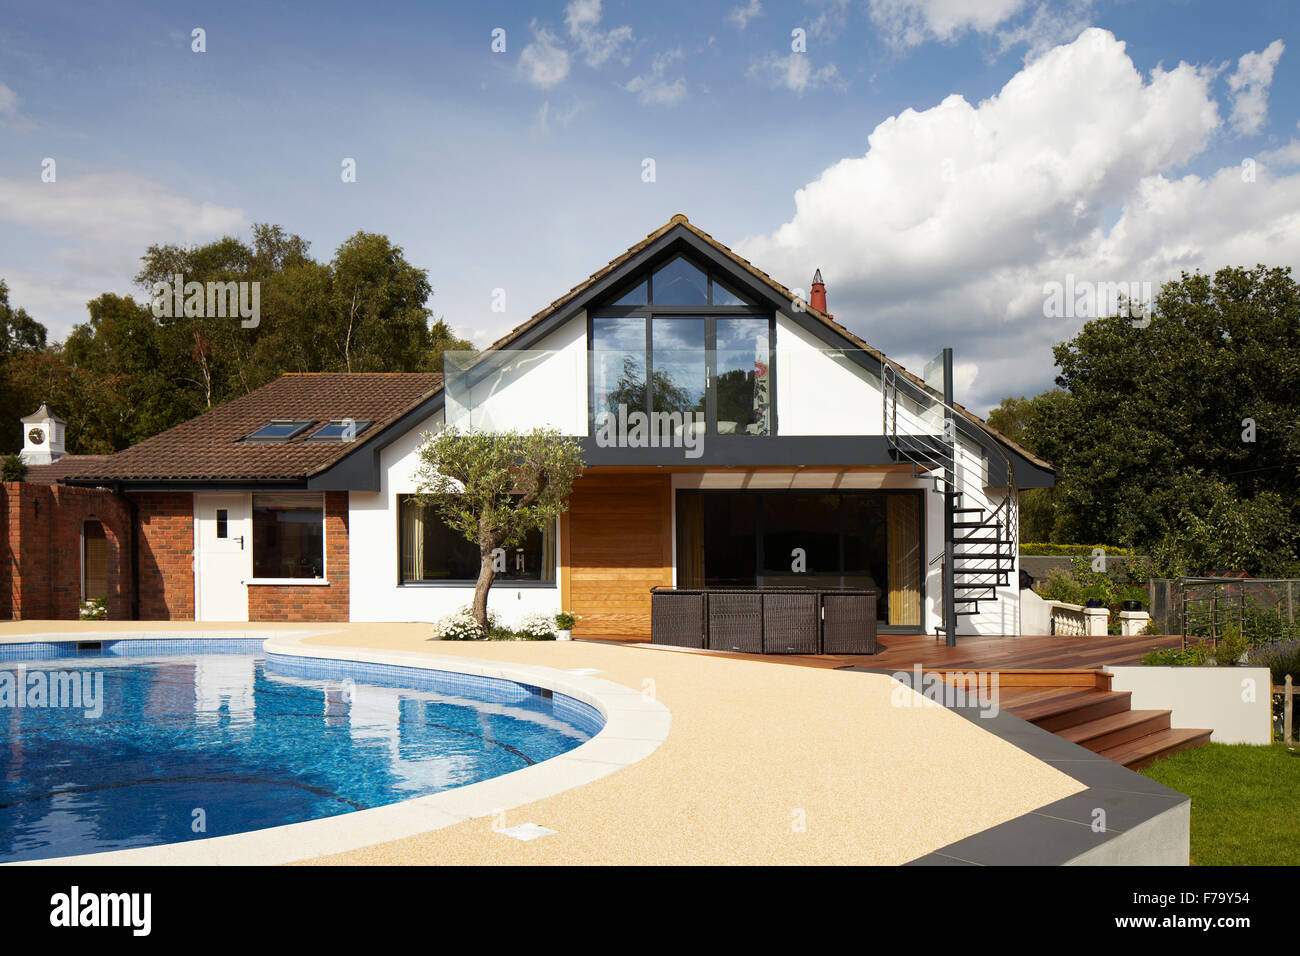 Exterior of private home with swimming pool, Dorset 2013 Stock Photo